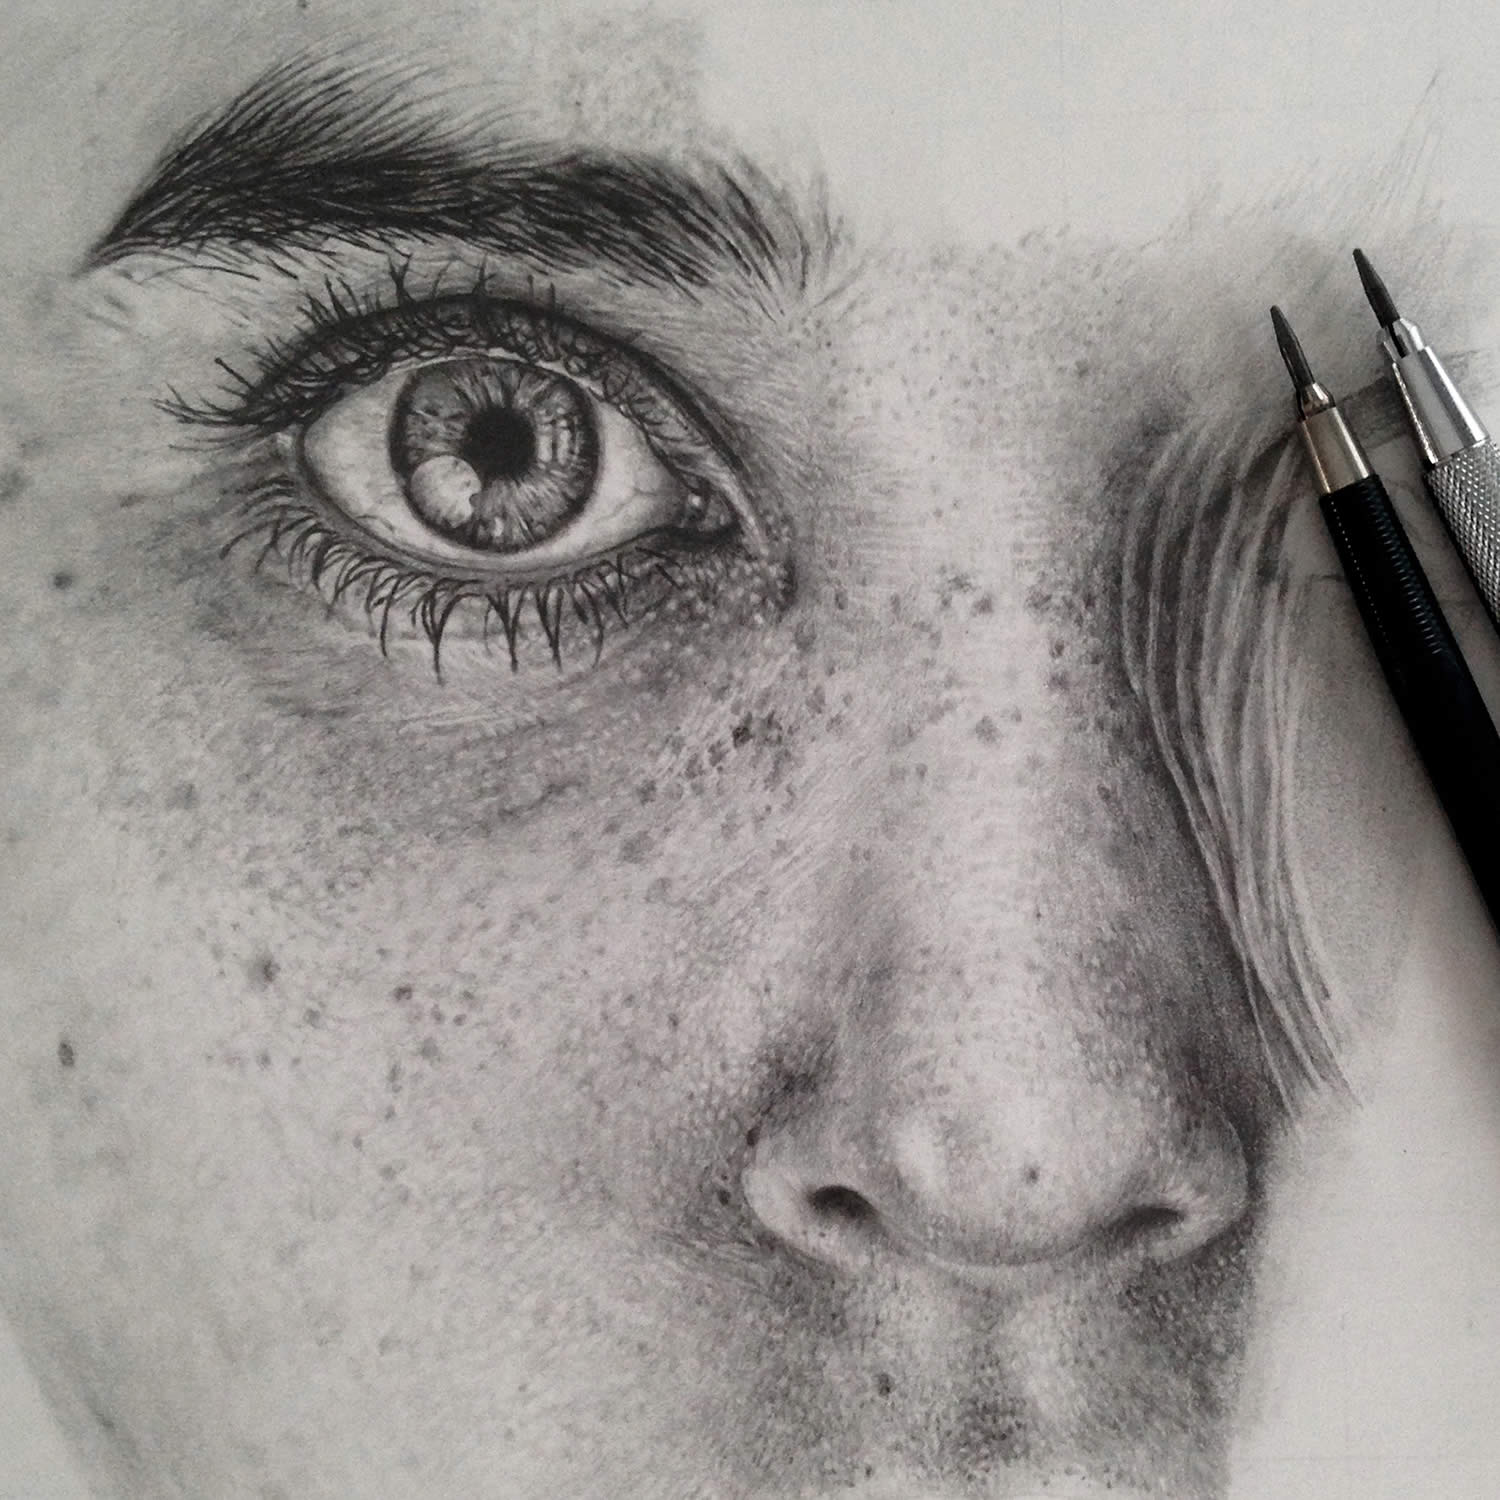 Hyper-realistic drawing of a woman's face.